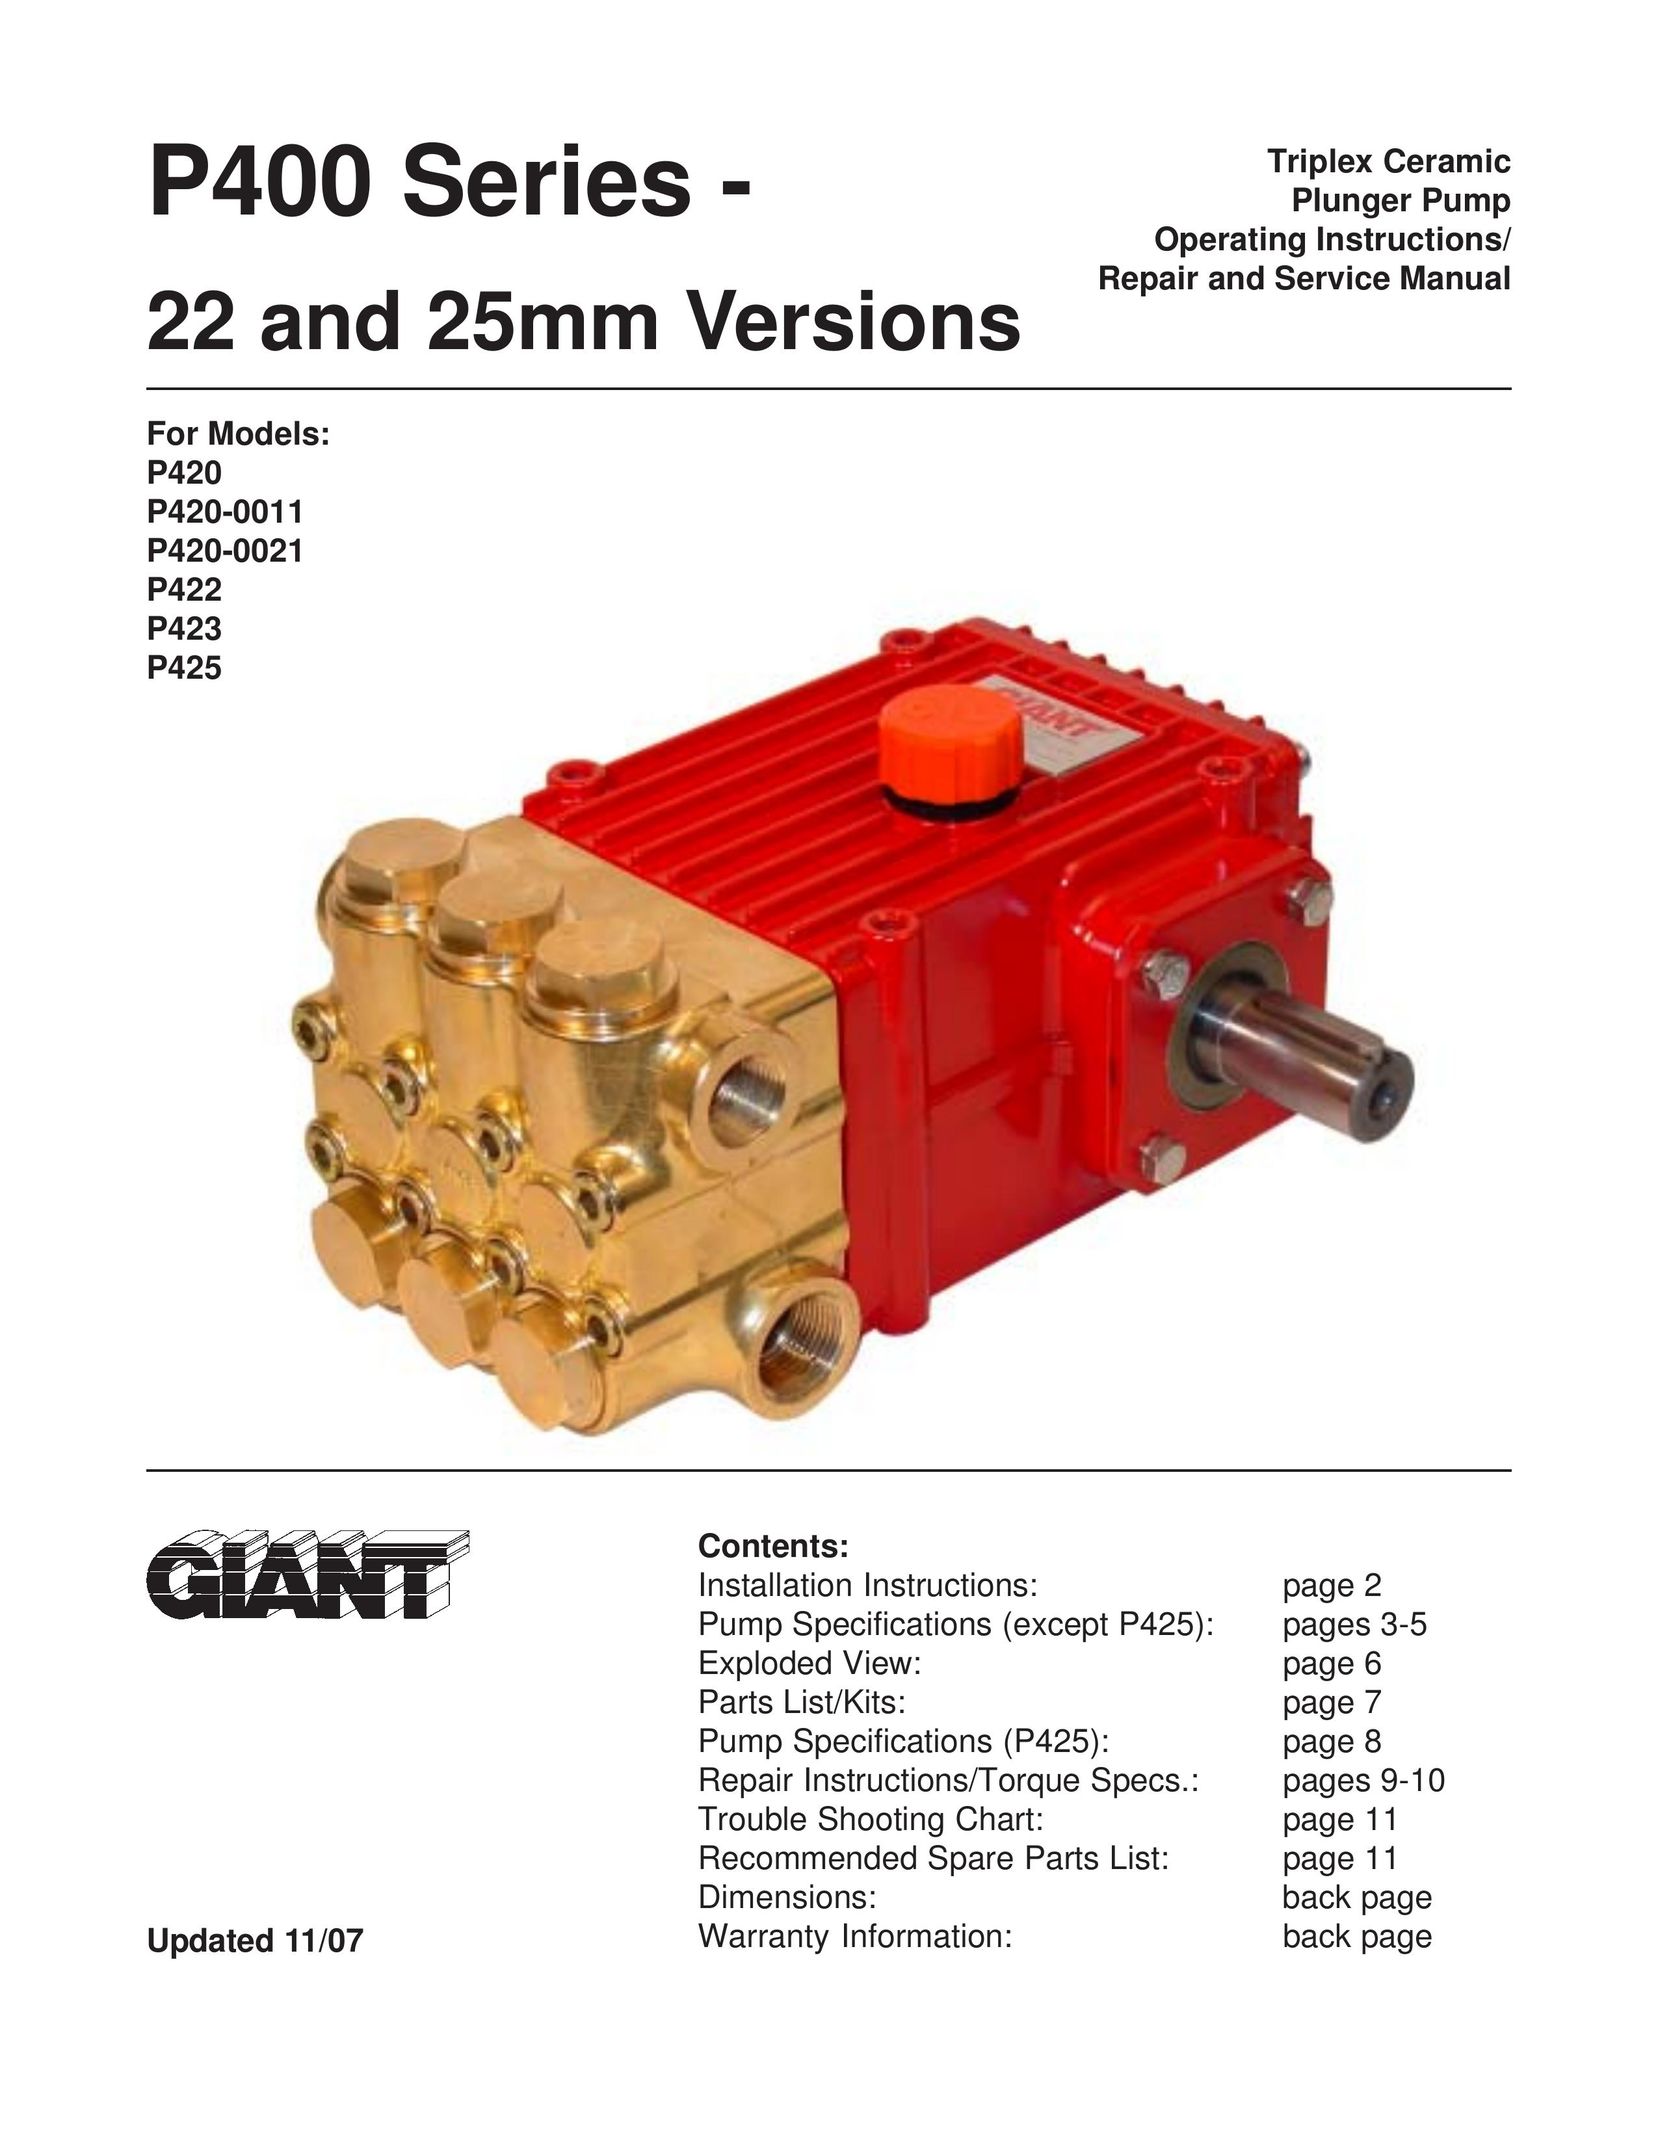 Giant P425 Septic System User Manual